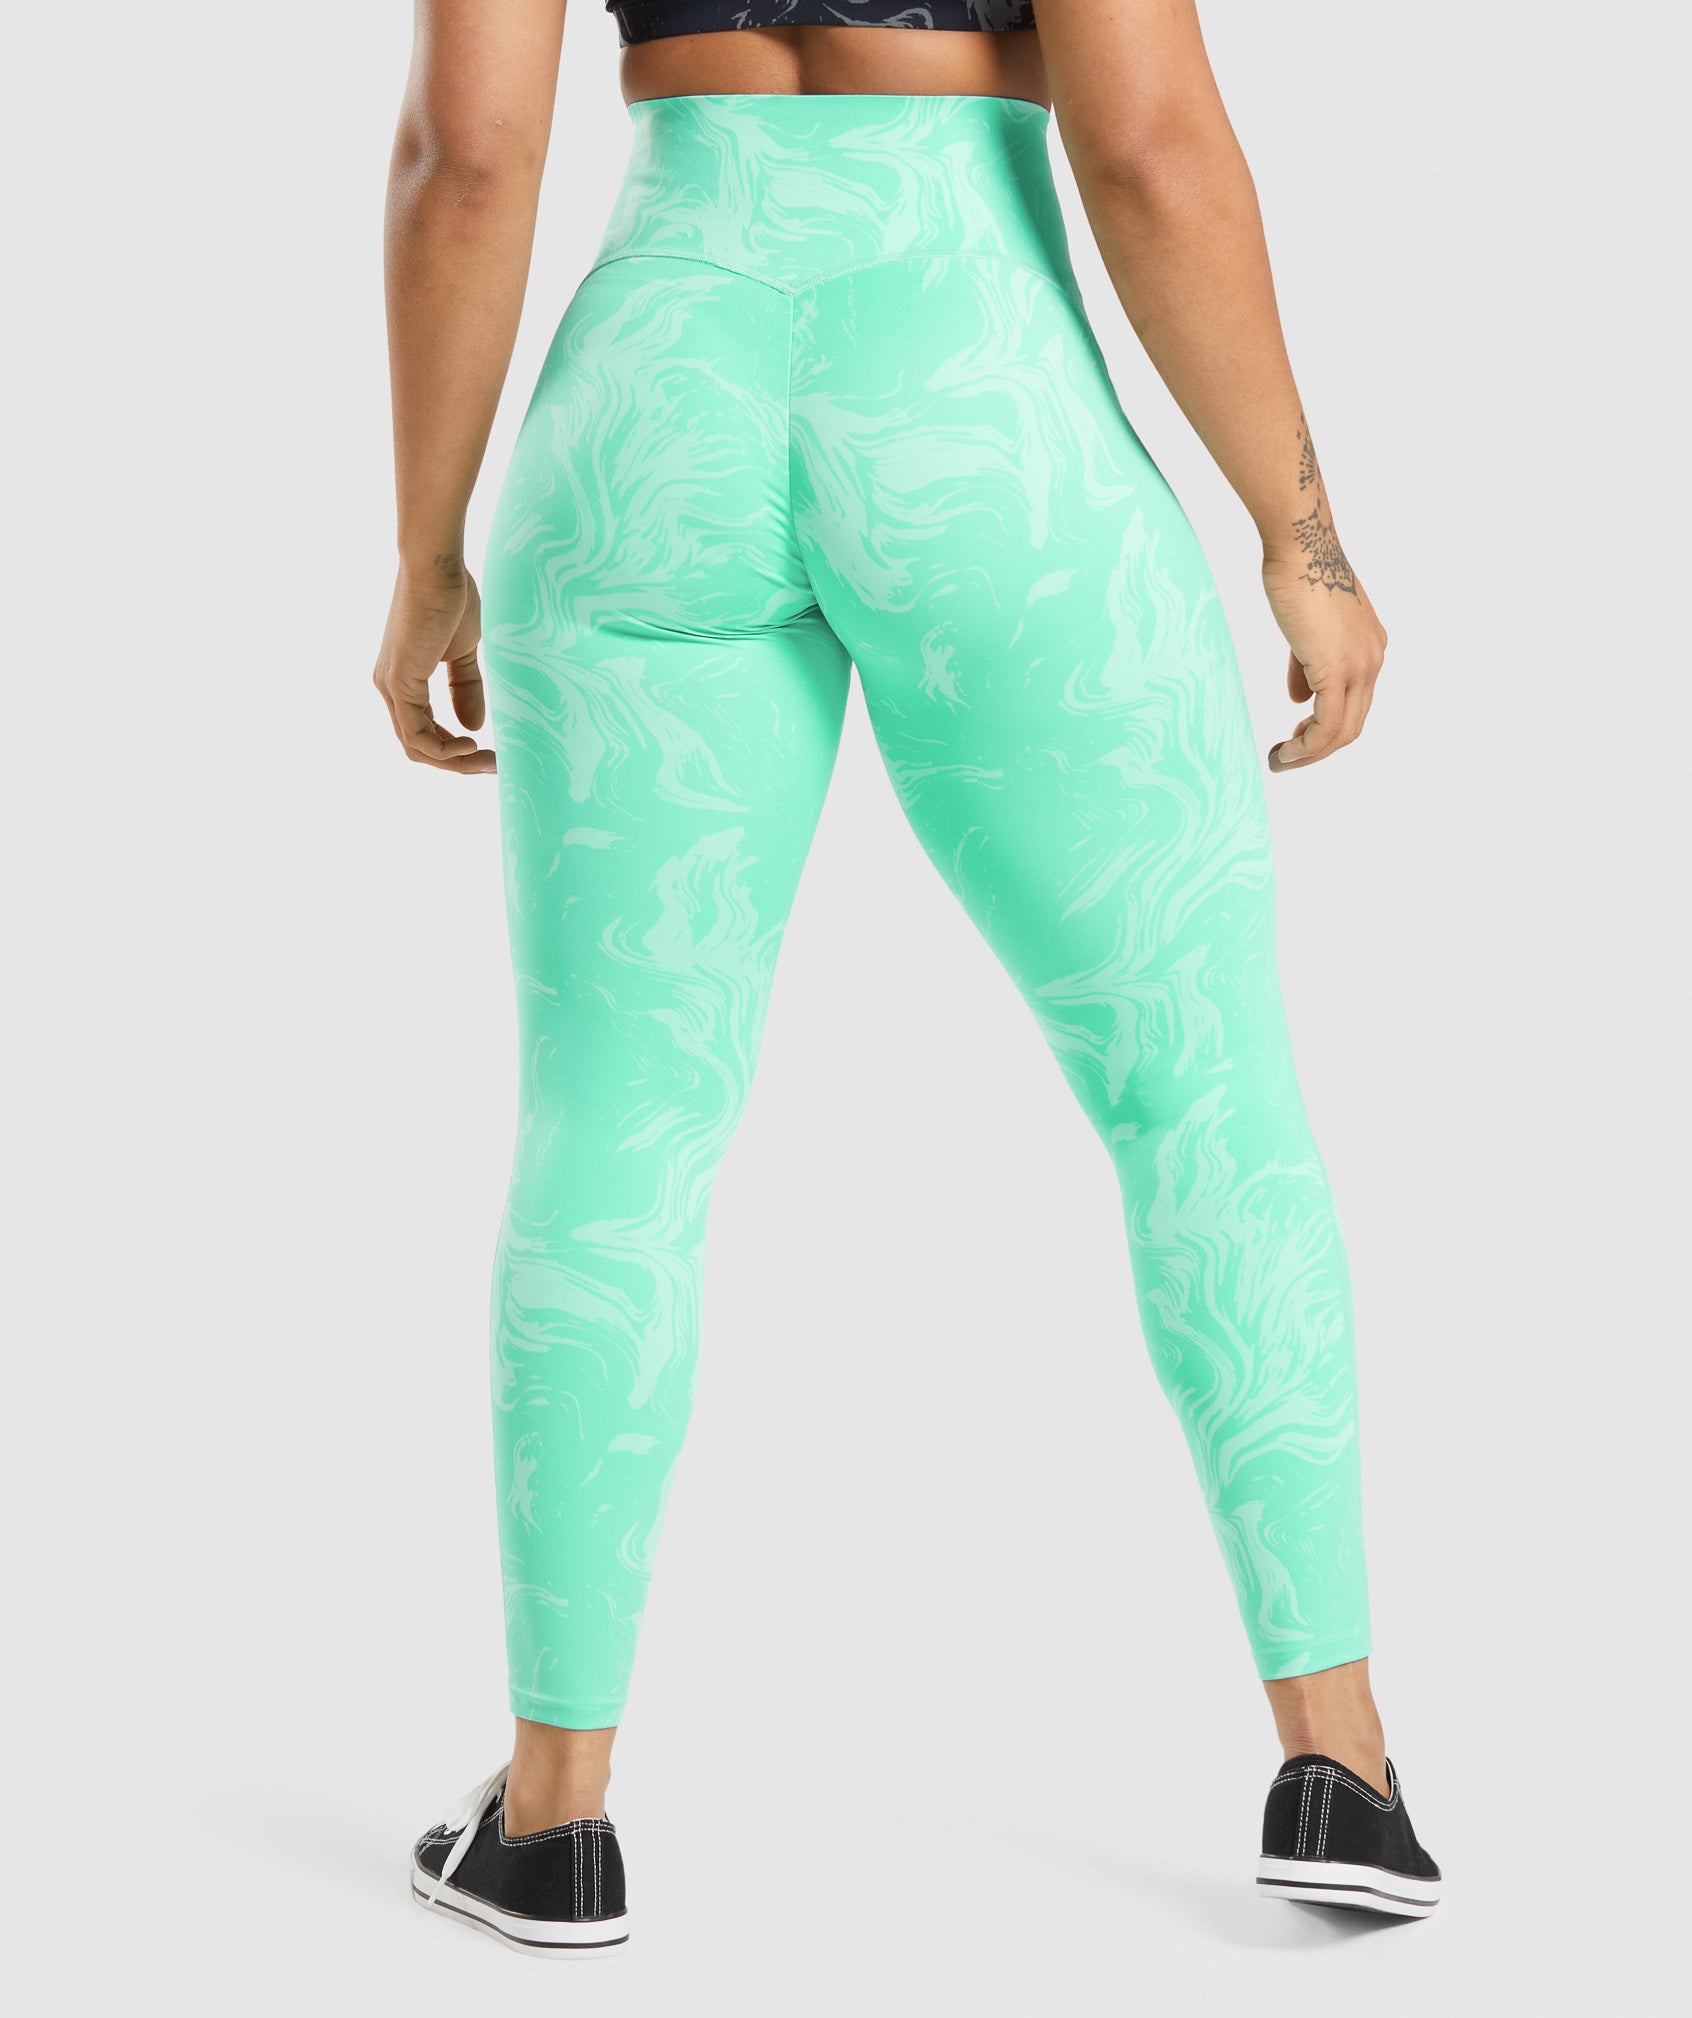 Waist Support Leggings in Bright Turquoise Print - view 2